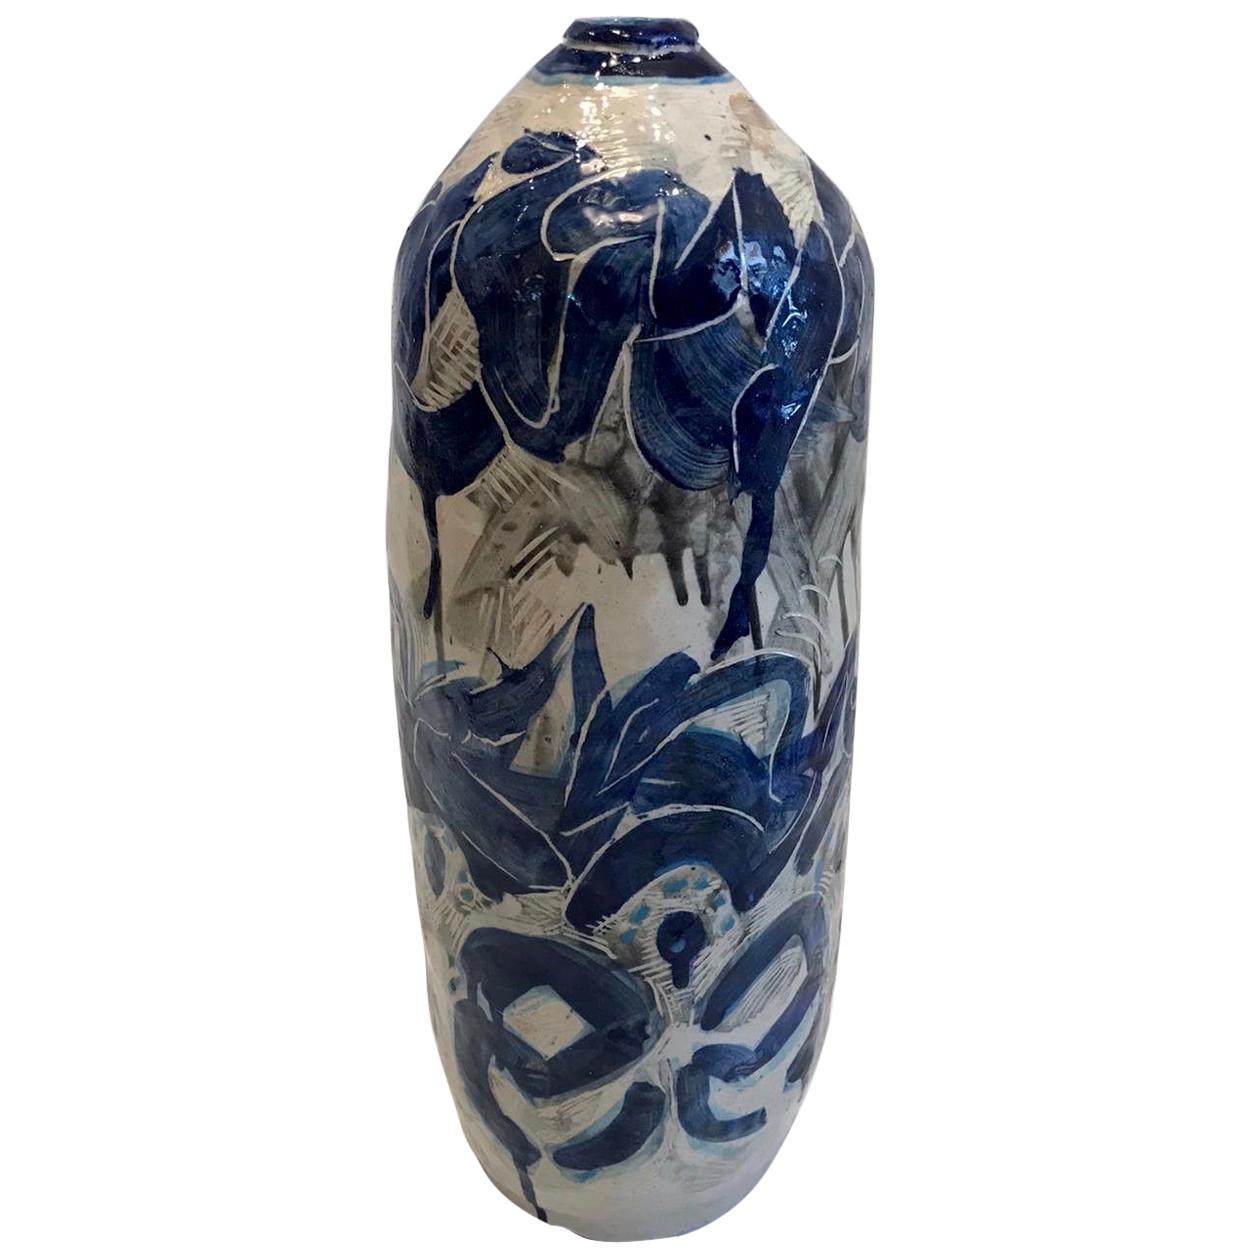 Exceptional Tall Glazed Studio Pottery For Sale